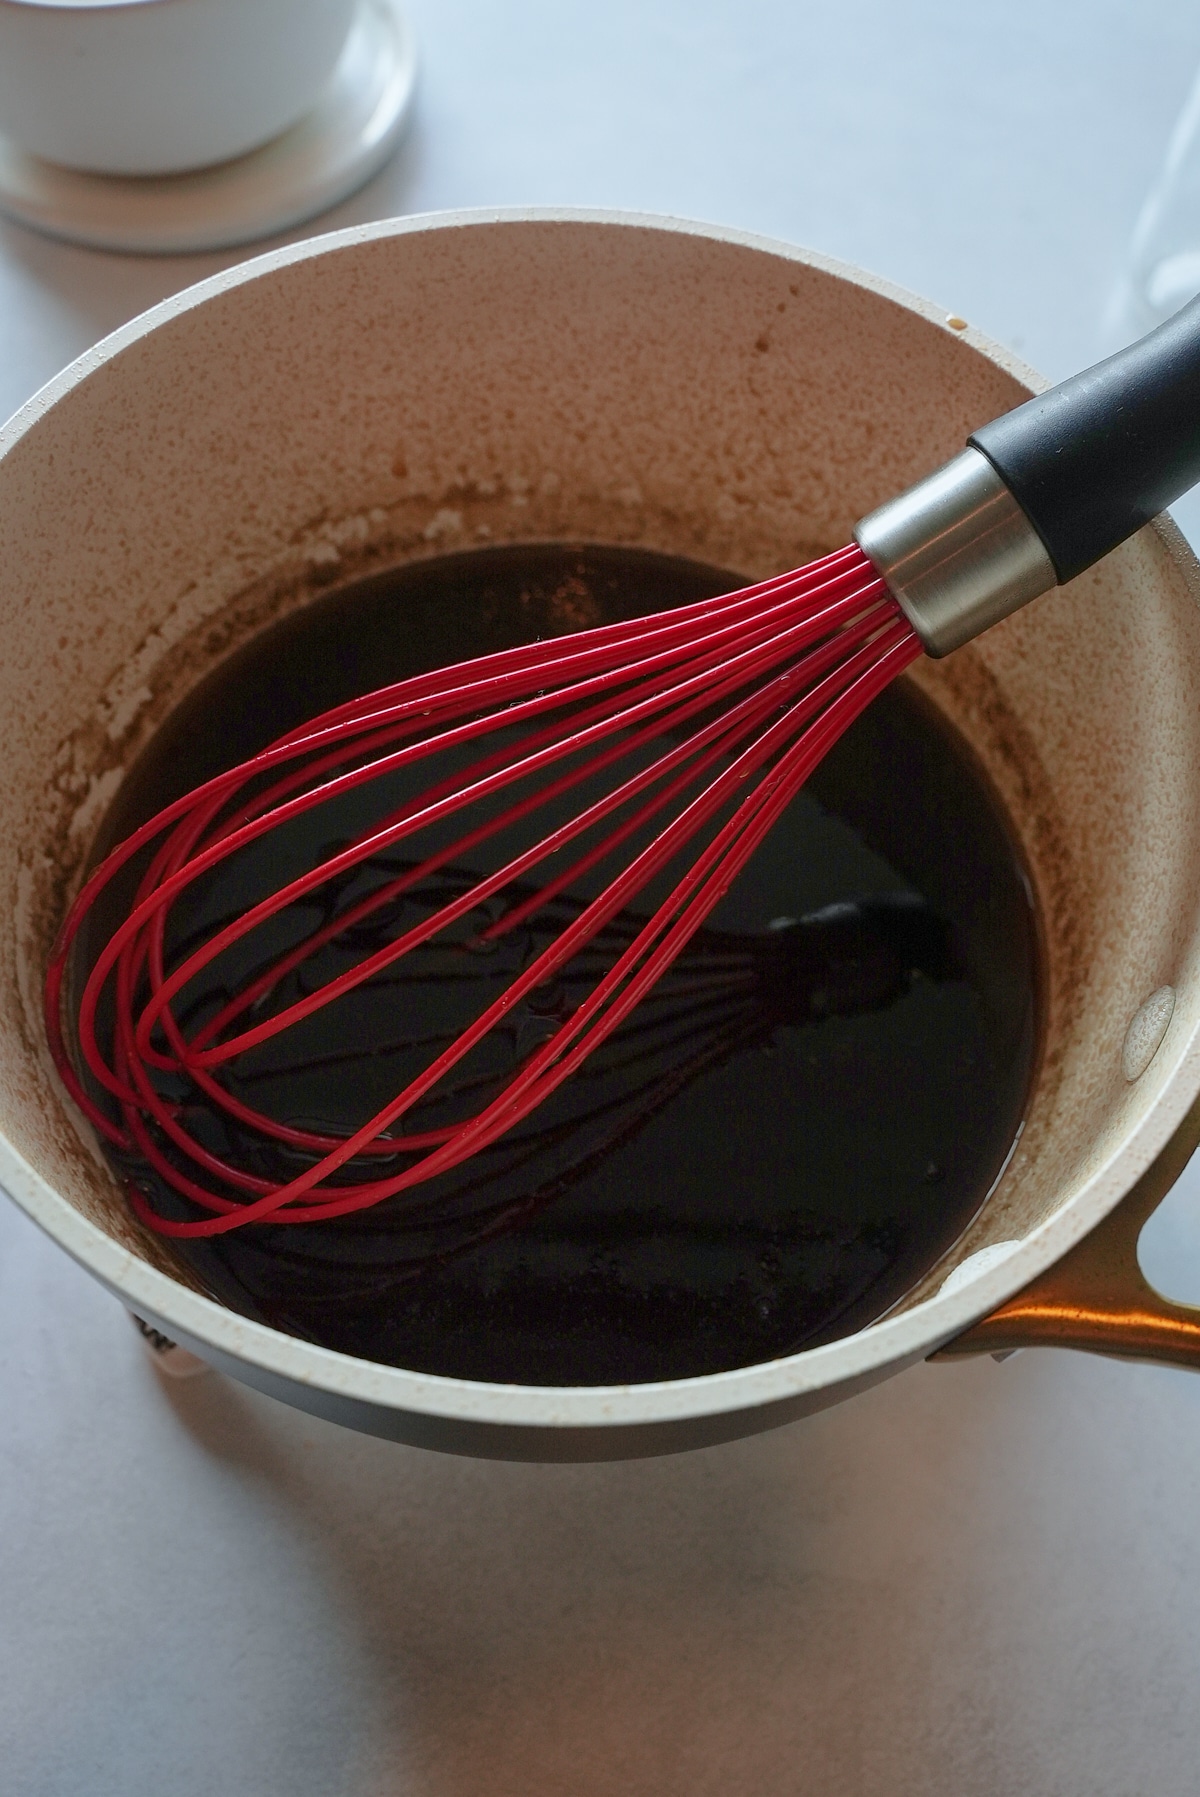 Simmering syrup in a pot with a red whisk.